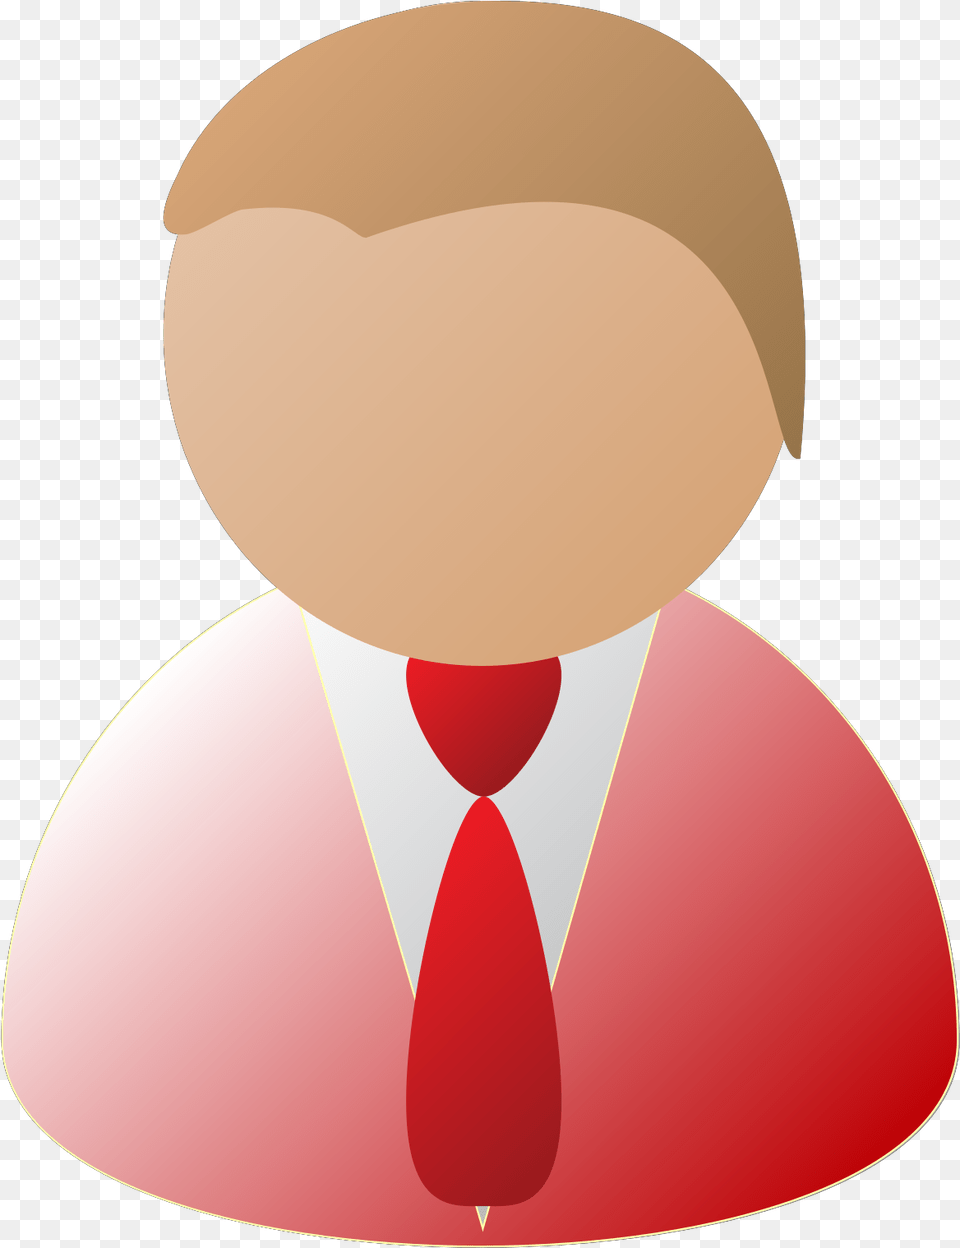 Teamstijl Person Icon Red Clip Art Icon And Svg Busness Person Clip Art, Accessories, Formal Wear, Necktie, Tie Free Png